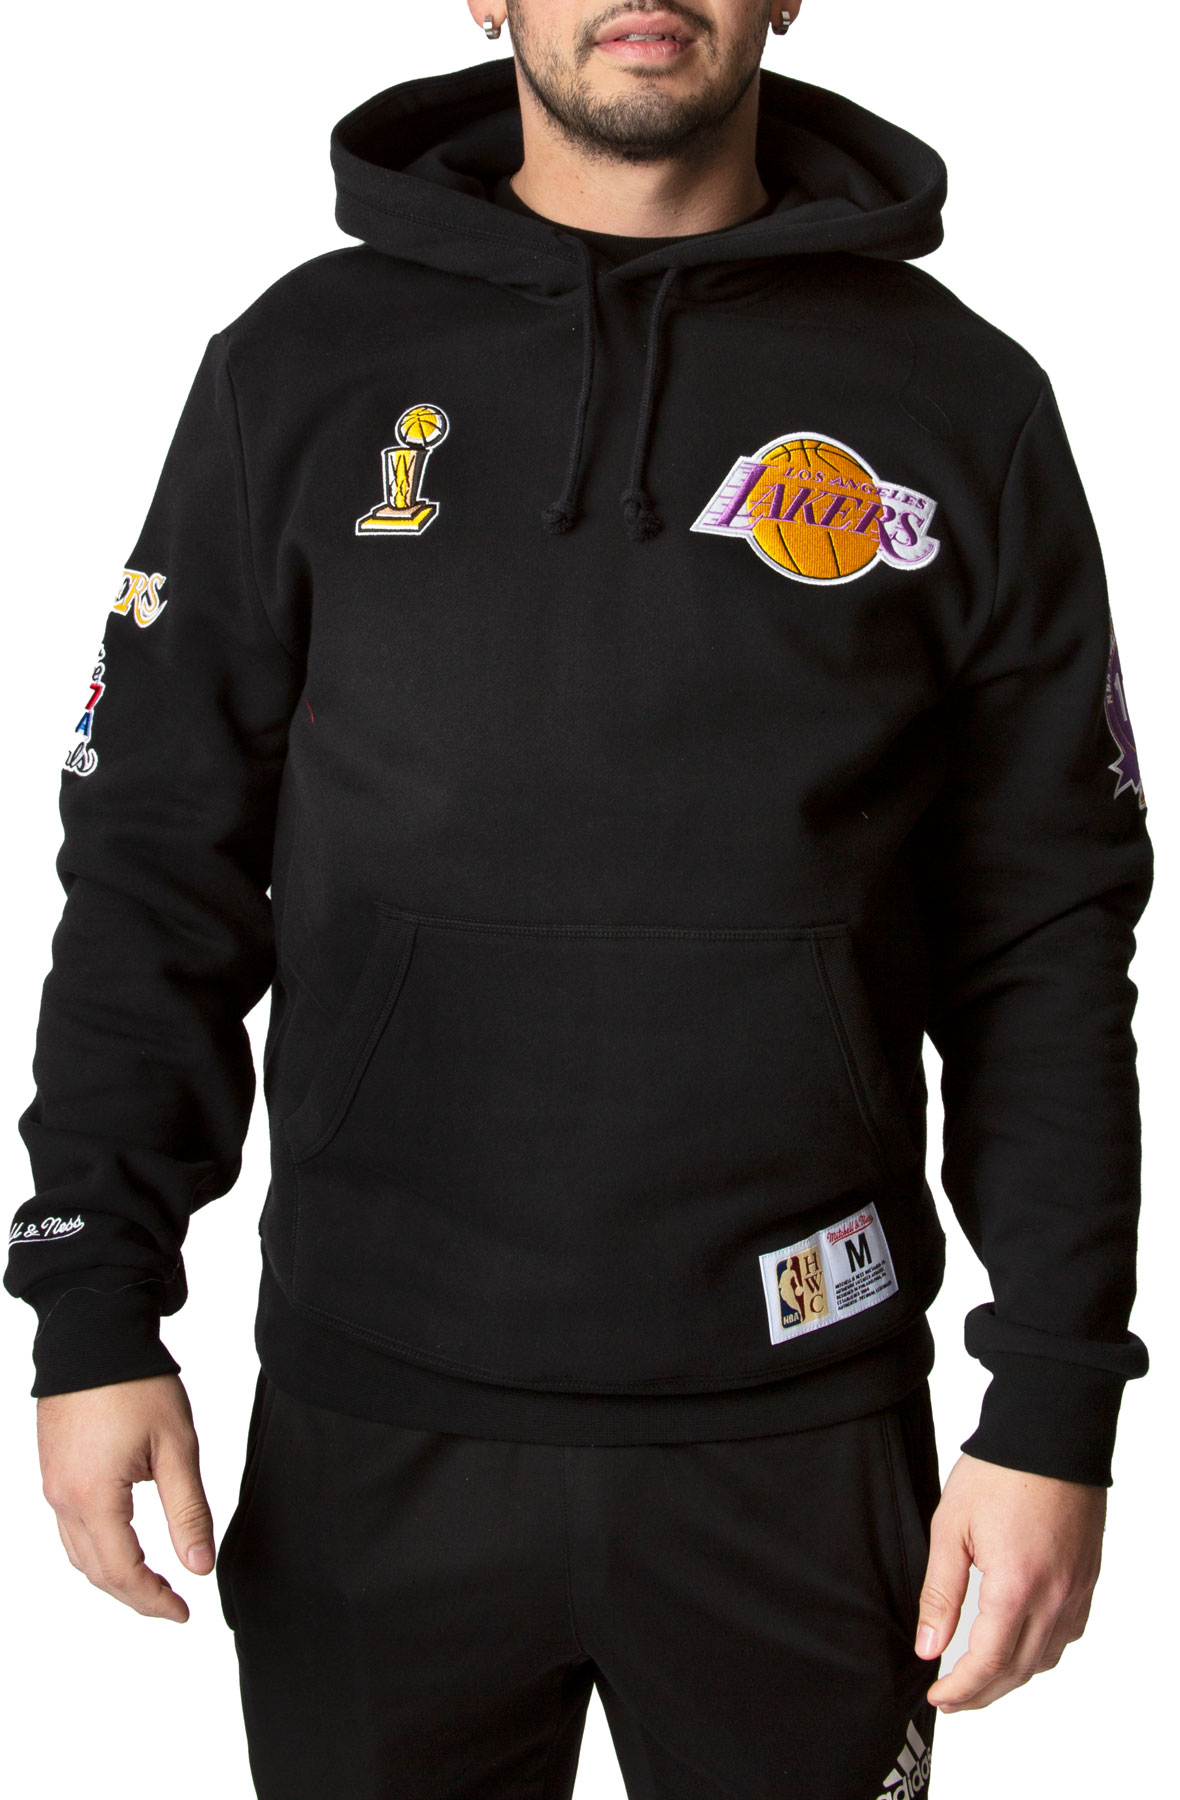 Mitchell & Ness Men's Los Angeles Lakers Purple Champ City Hoodie, Small